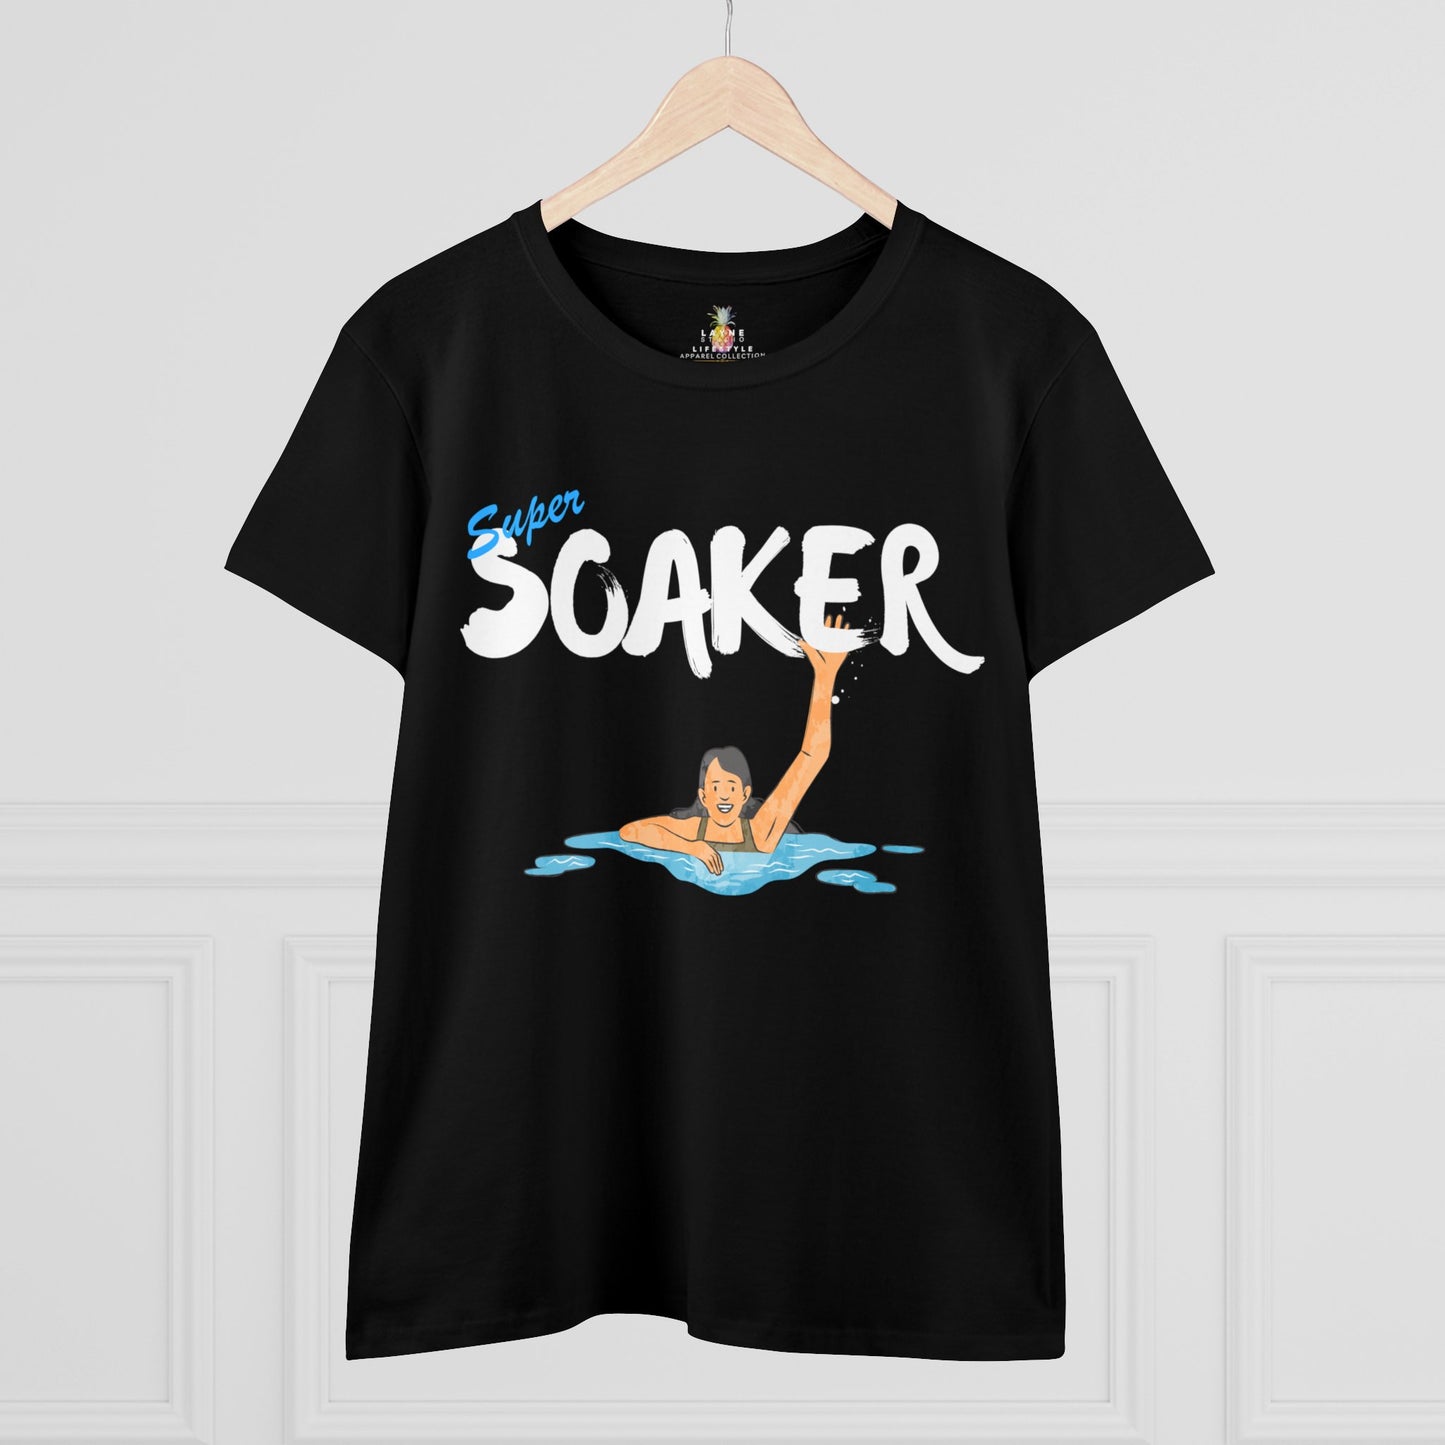 "Super Soaker" Puddle Graphic Women's Midweight Cotton Tee